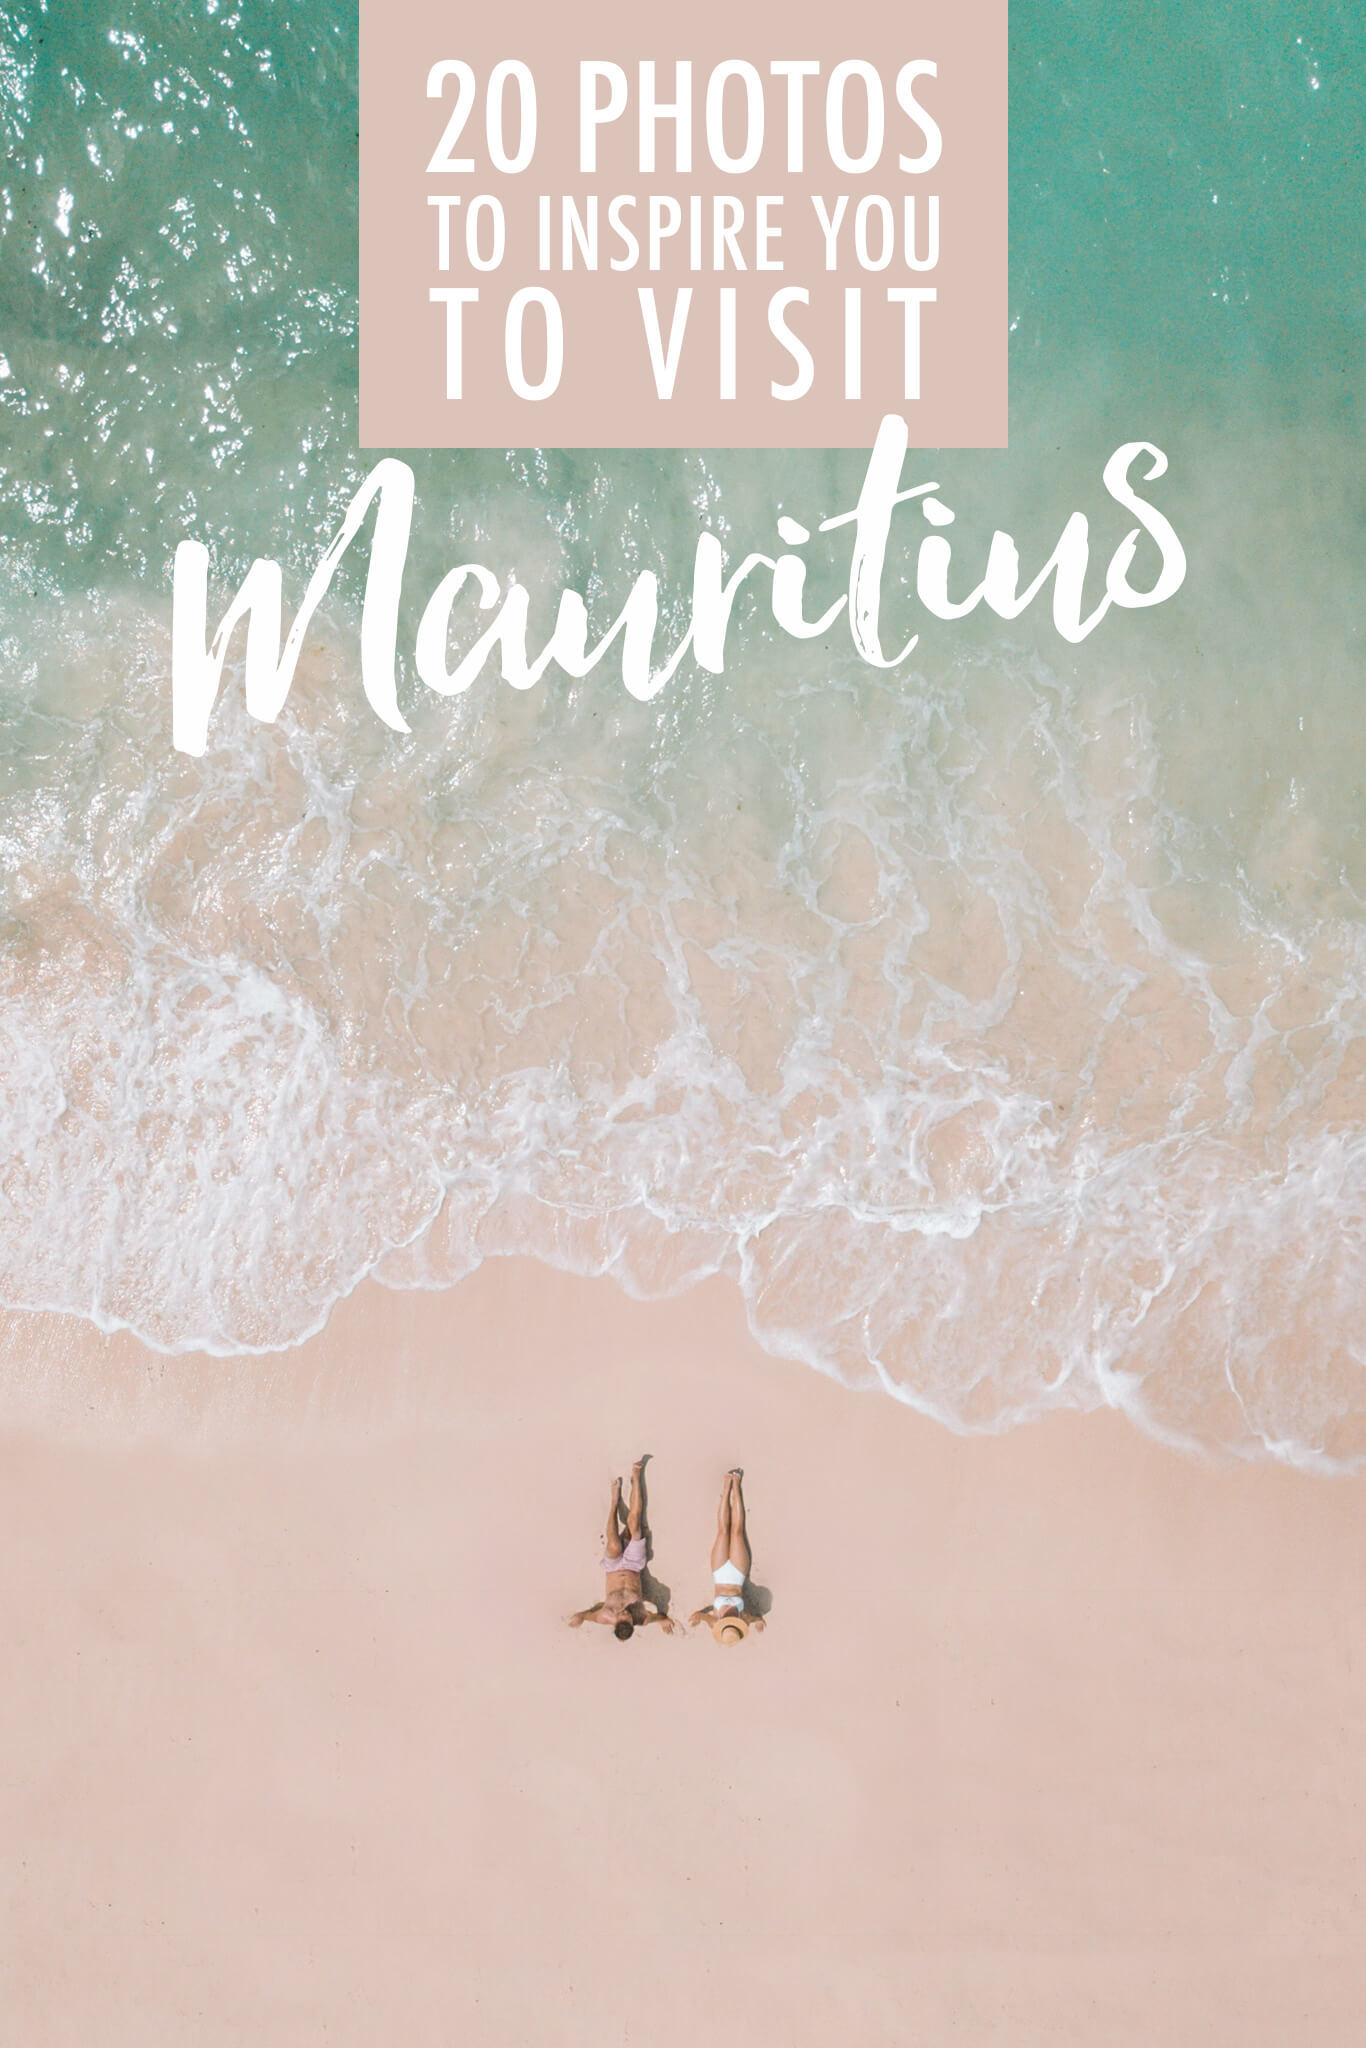 20 Photos to Inspire You to Visit Mauritius